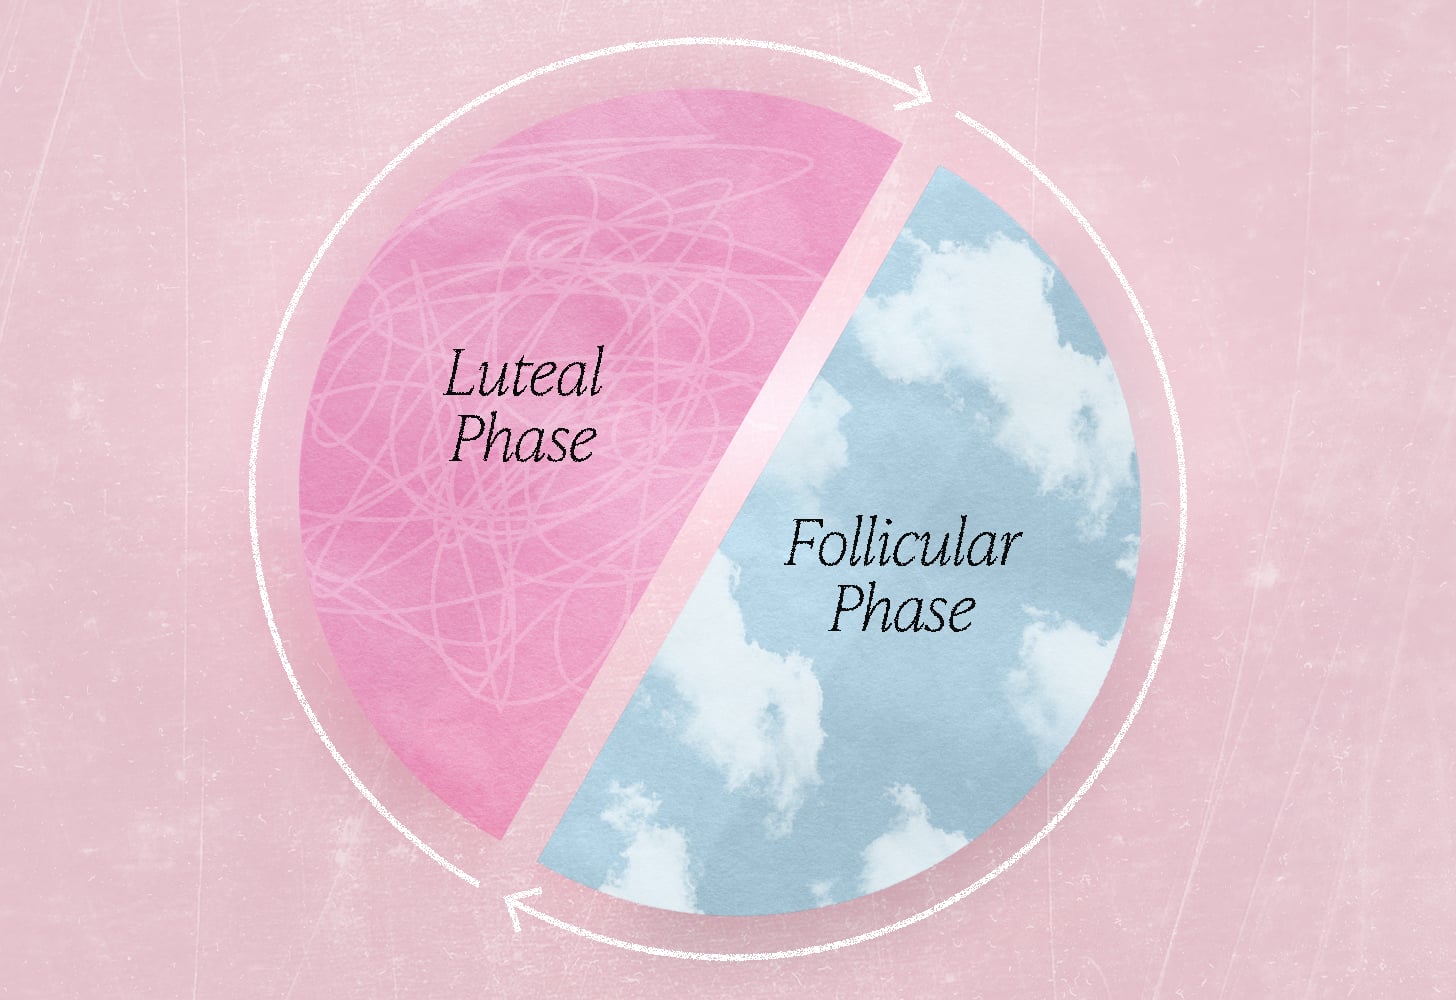 Ladies: How is your Luteal Phase doing?